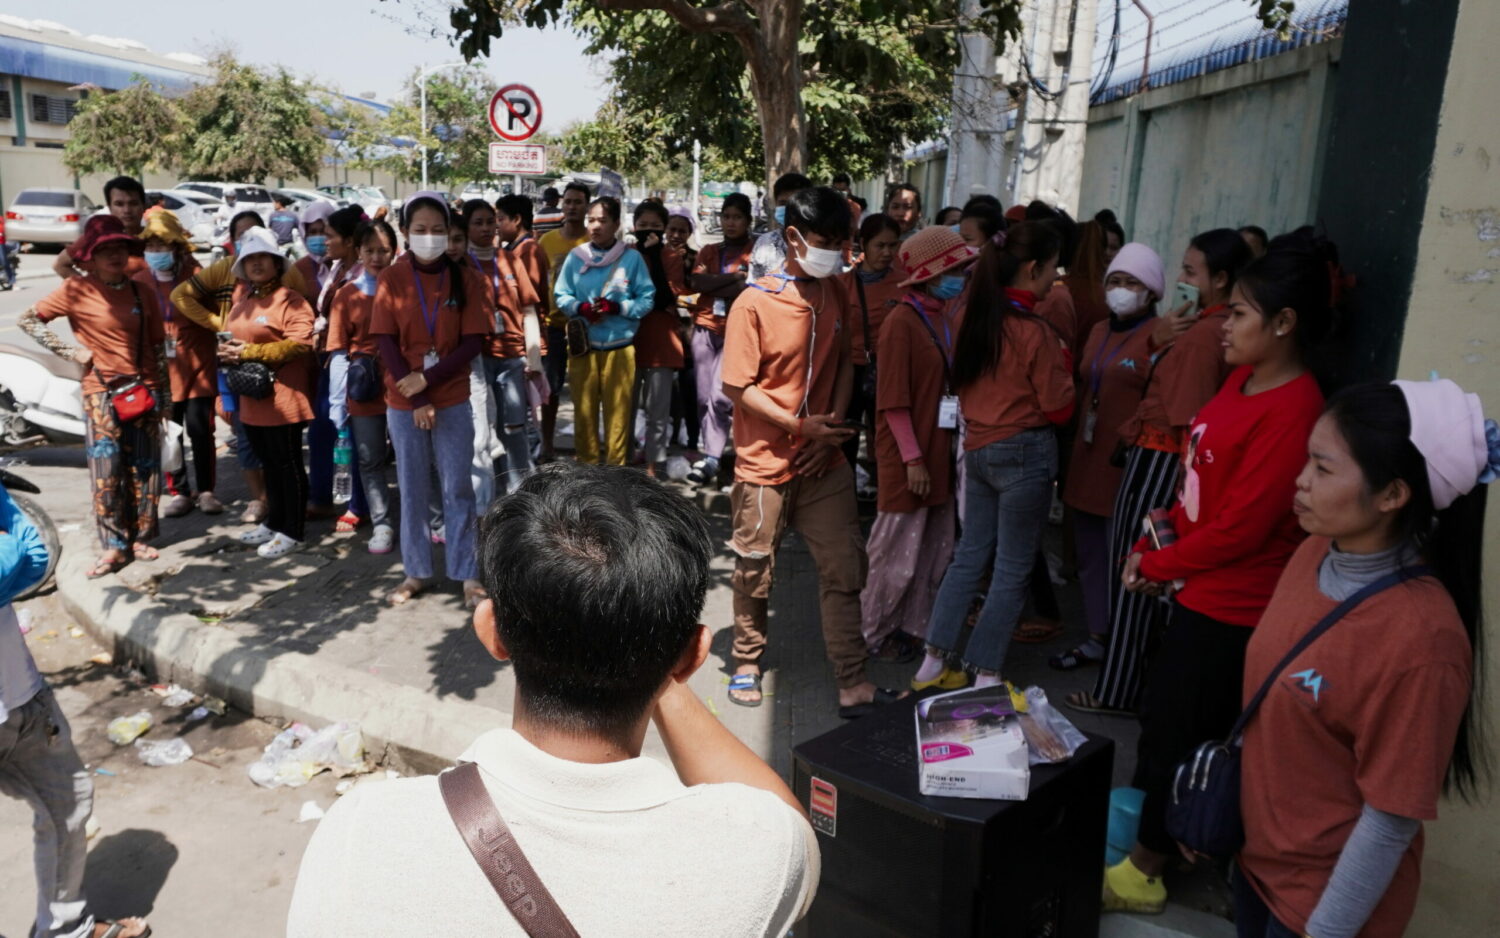 Protesters outside the New Mingda garment factory in Phnom Penh on November 2, 2022. (Hean Rangsey/VOD)